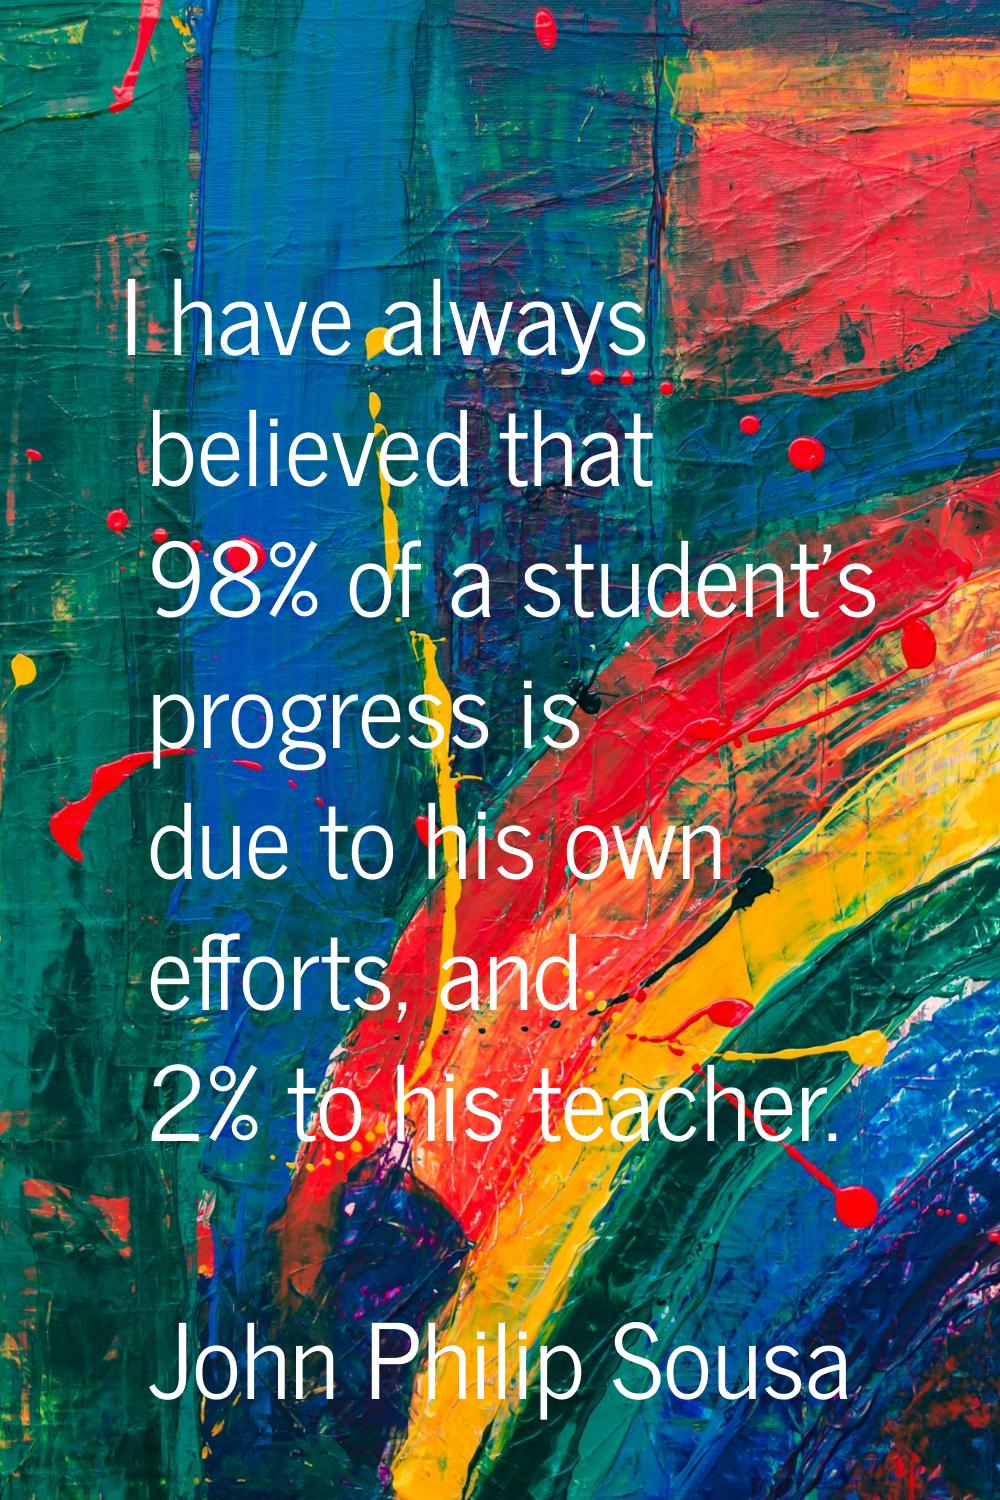 I have always believed that 98% of a student's progress is due to his own efforts, and 2% to his te